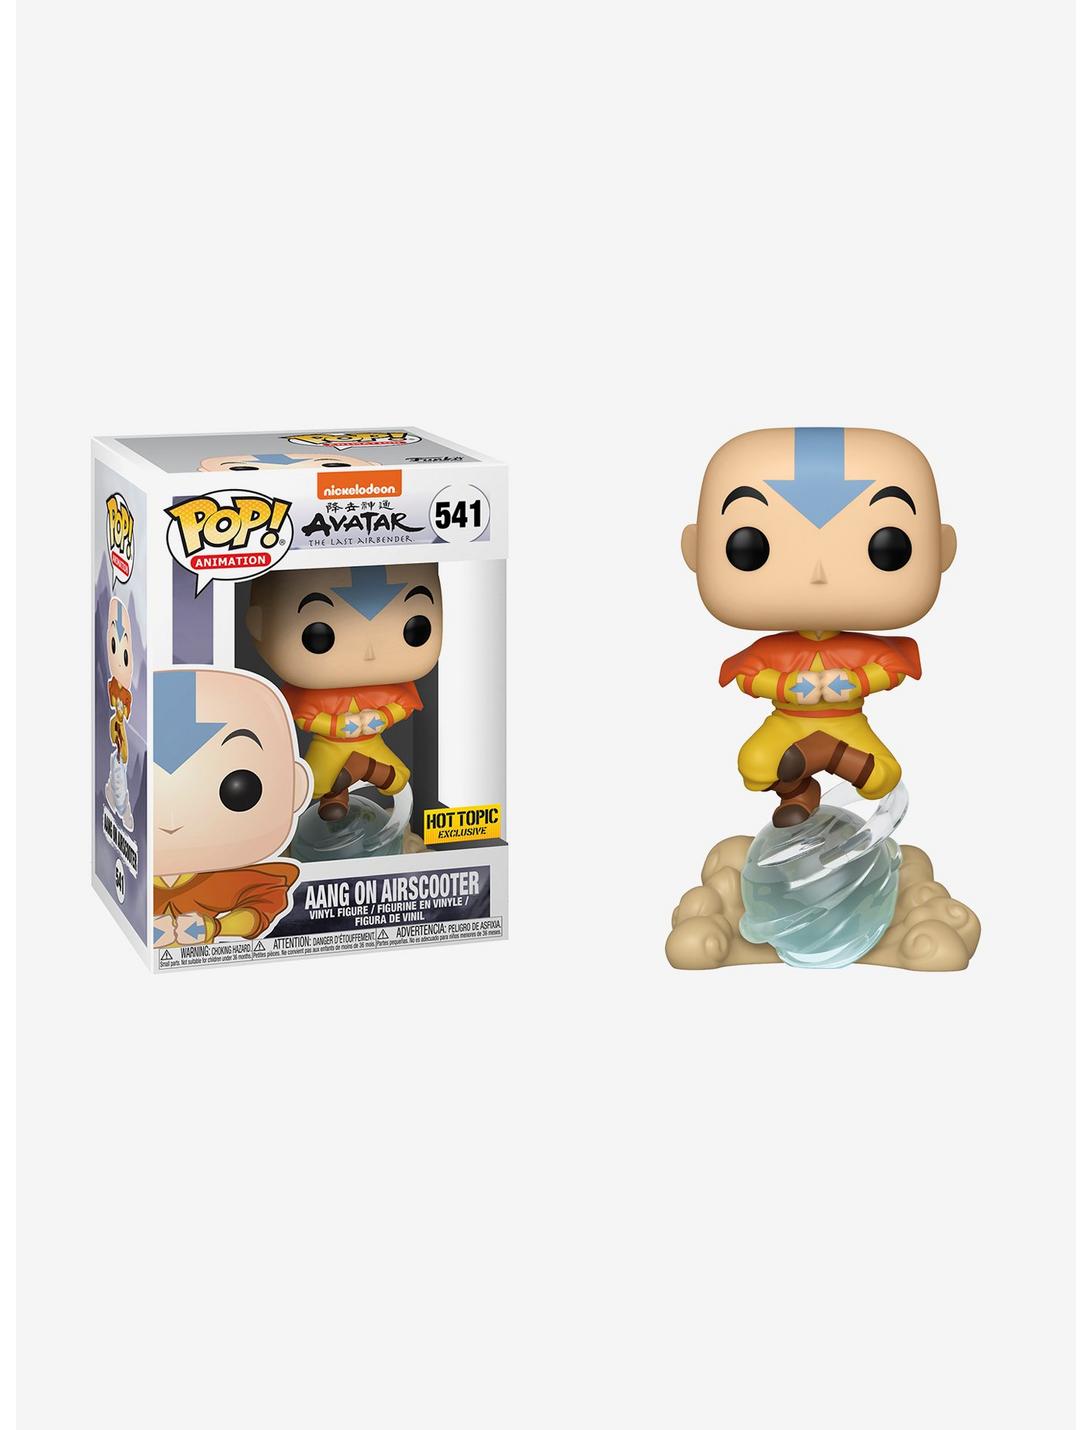 Funko Avatar The Last Airbender Pop! Aang On Airscooter Vinyl Figure Hot Topic Exclusive, , hi-res